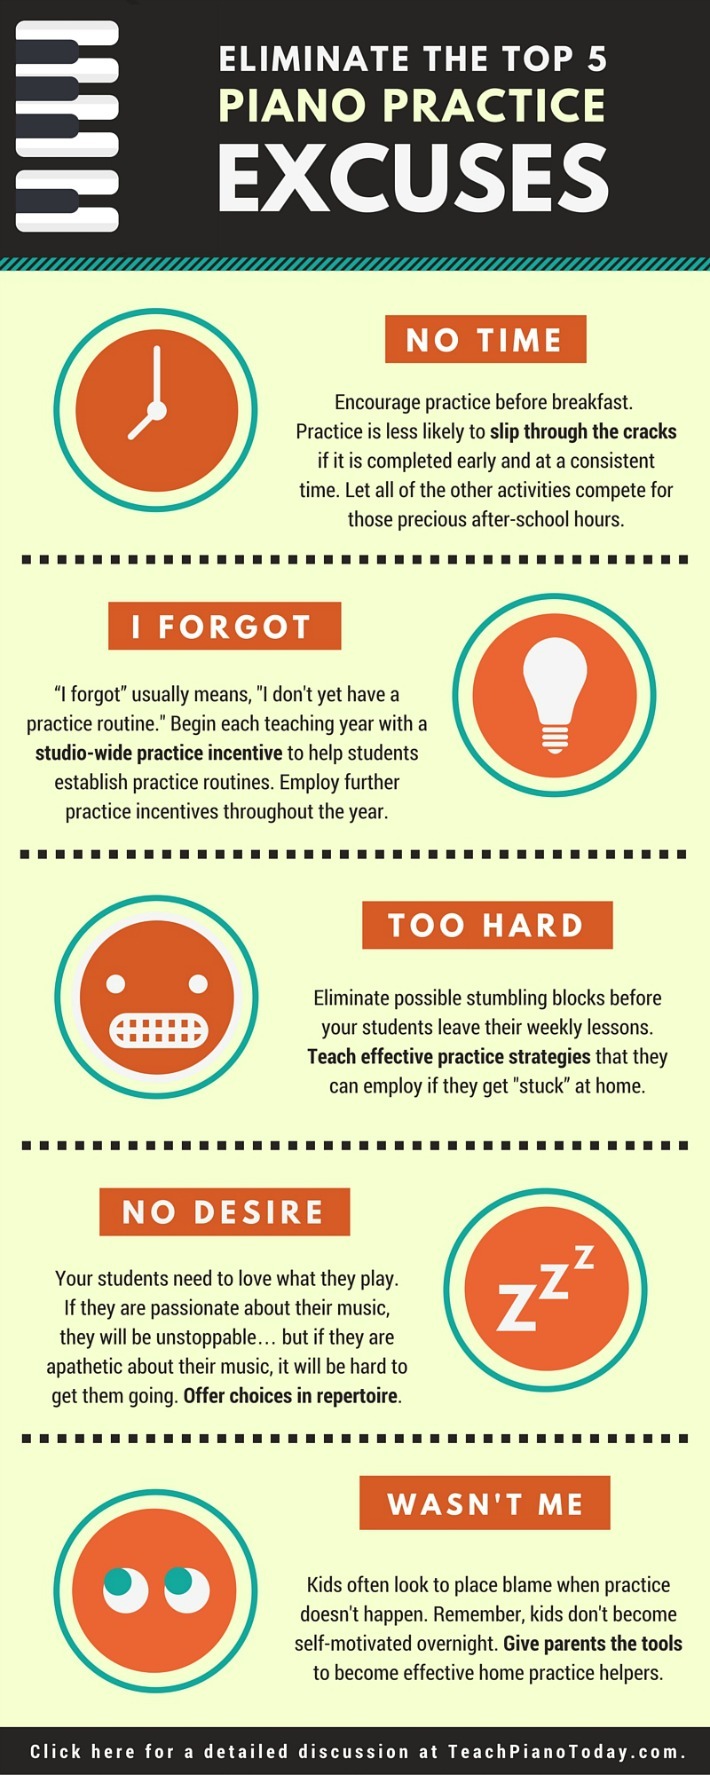 10 Easy Piano Songs Anyone Can Play [Infographic] - Lessons On The Go